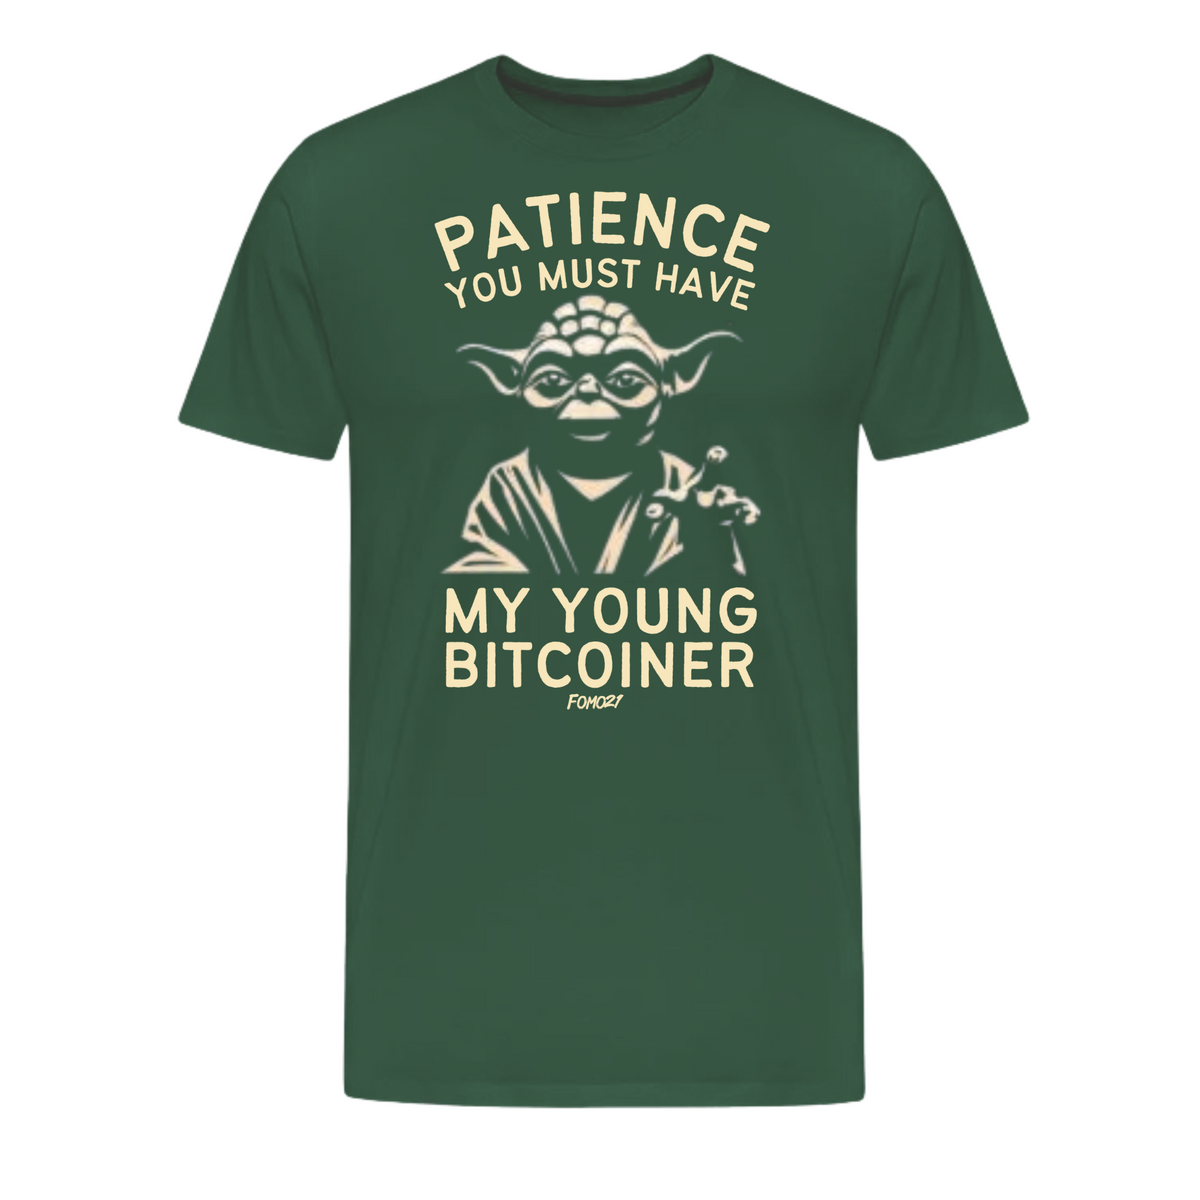 Patience You Must Have Bitcoin T-Shirt - fomo21